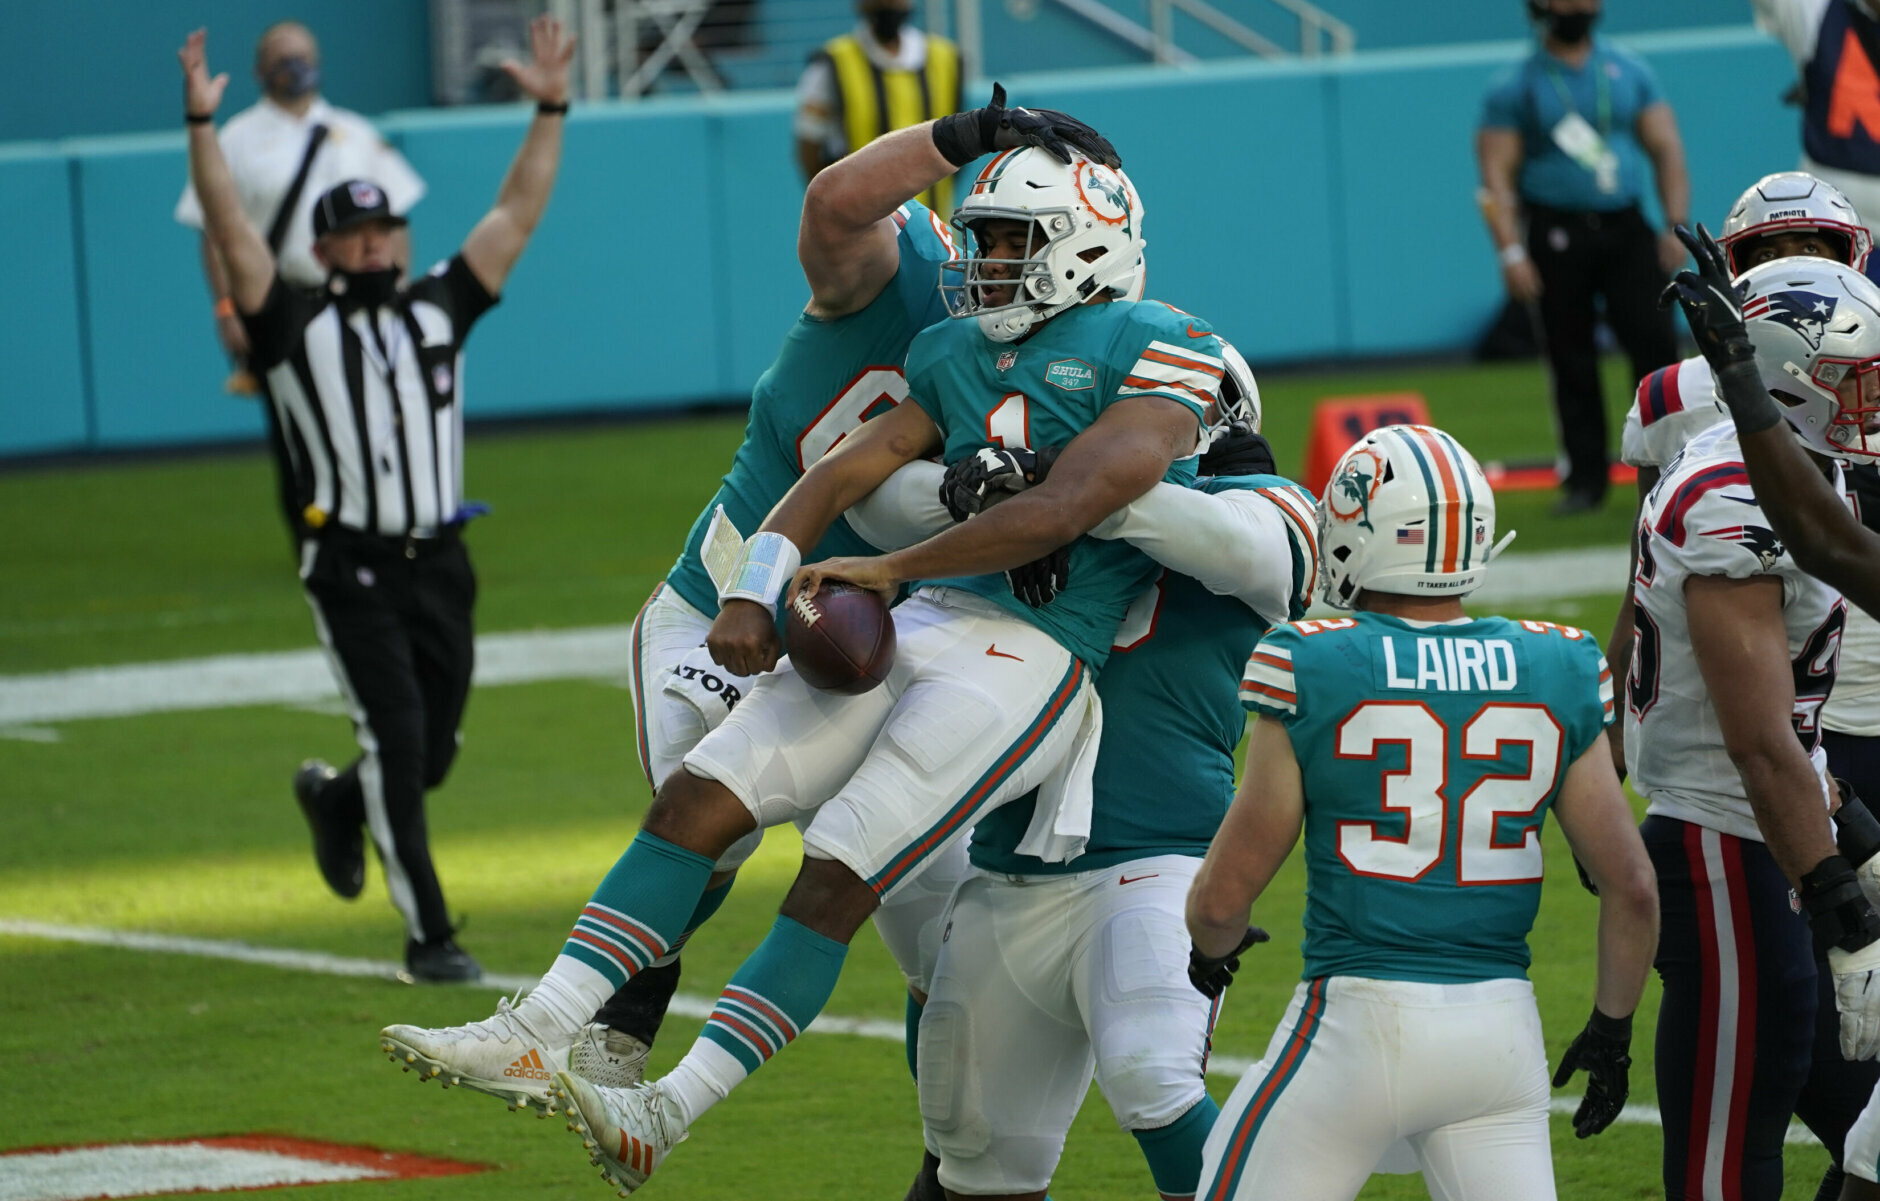 <p><b><i>Patriots 12</i></b><br />
<b><i>Dolphins 22</i></b></p>
<p>My, how far the mighty have fallen.</p>
<p>New England&#8217;s 12-year playoff streak, 12 straight wins against rookie QBs and 19 consecutive winning seasons were simultaneously snapped in a miserable day in Miami. The AFC East belongs to the Bills and Dolphins now, and it&#8217;s hard not to feel like it&#8217;s going to be that way for a good, long while.</p>
<p>And give it up for Salvon Ahmed, who <a href="https://profootballtalk.nbcsports.com/2020/12/20/salvon-ahmed-had-a-big-game-for-his-grandmother/">called his shot for his sick grandmother</a> and ended Miami&#8217;s 31-game drought without a 100-yard rusher. Something special is brewing on South Beach.</p>
